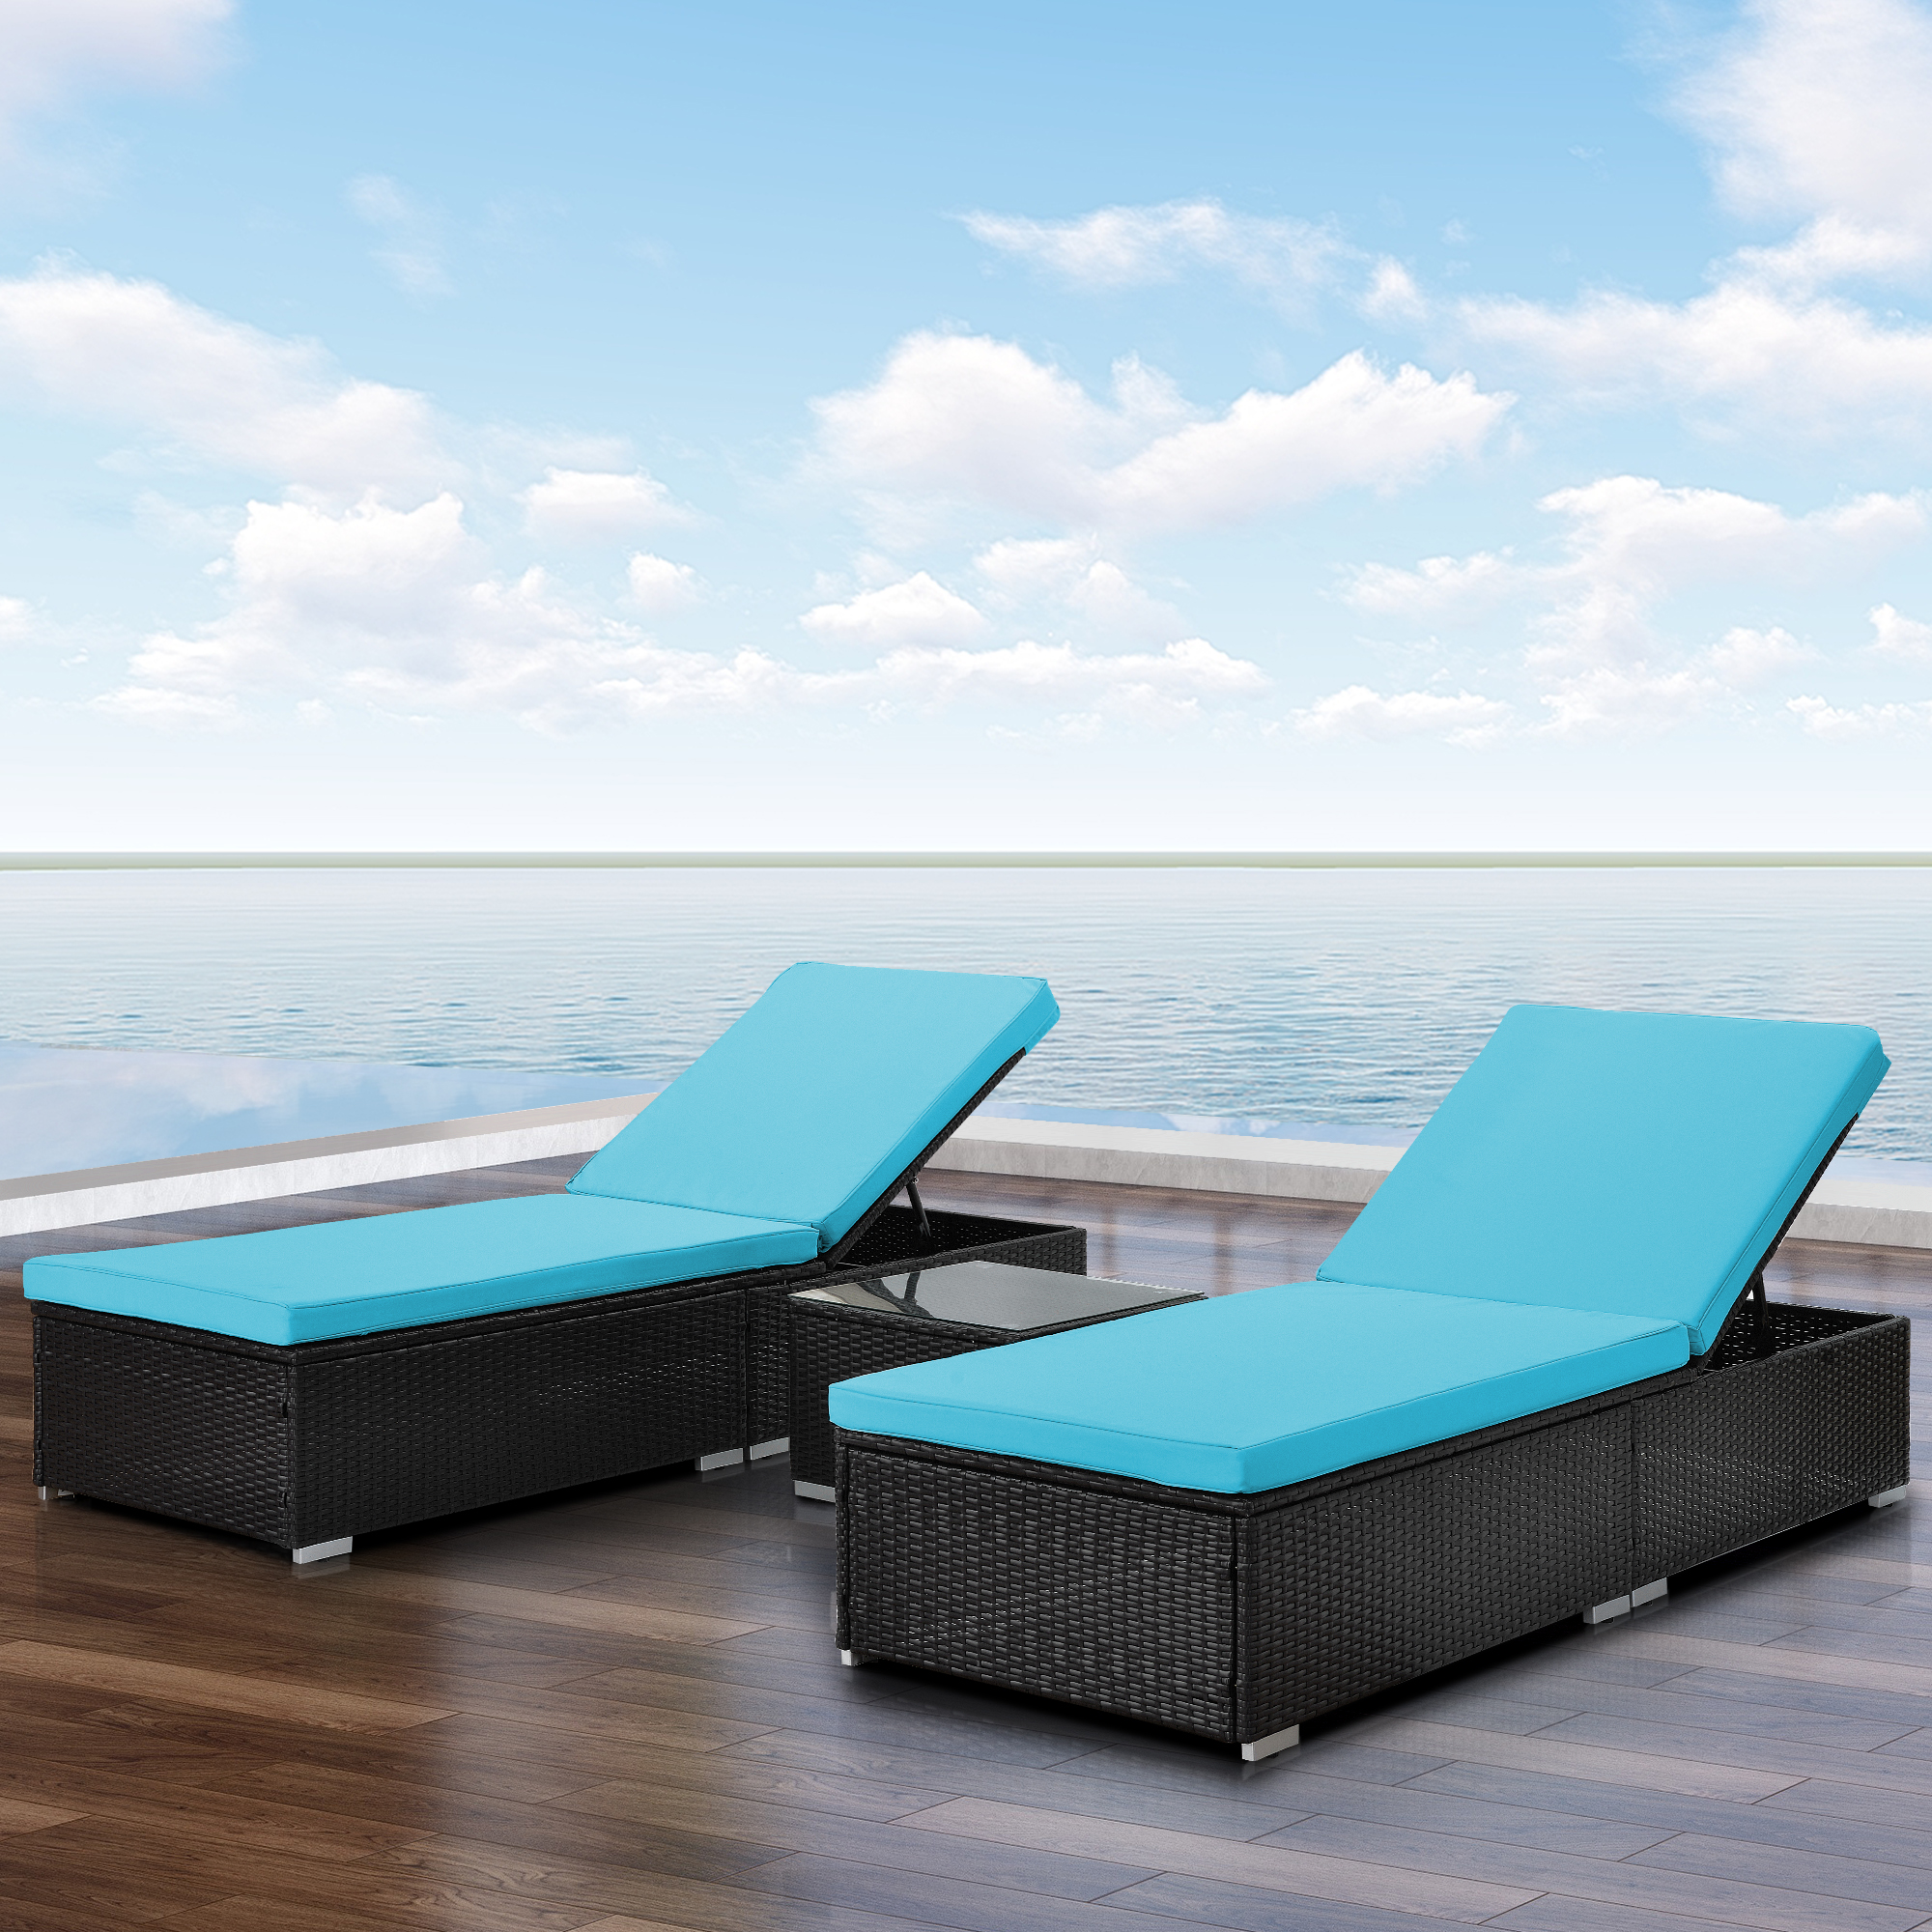 YOFE Chaise Lounge Chairs, 3 Pcs Patio Chaise Lounge Set, Outdoor Lounge Chair Set with Blue Cushions and Table, Rattan Wicker Lounge Chair, Outdoor Indoor Adjustable Rattan Reclining Chairs, R5736 - image 2 of 13